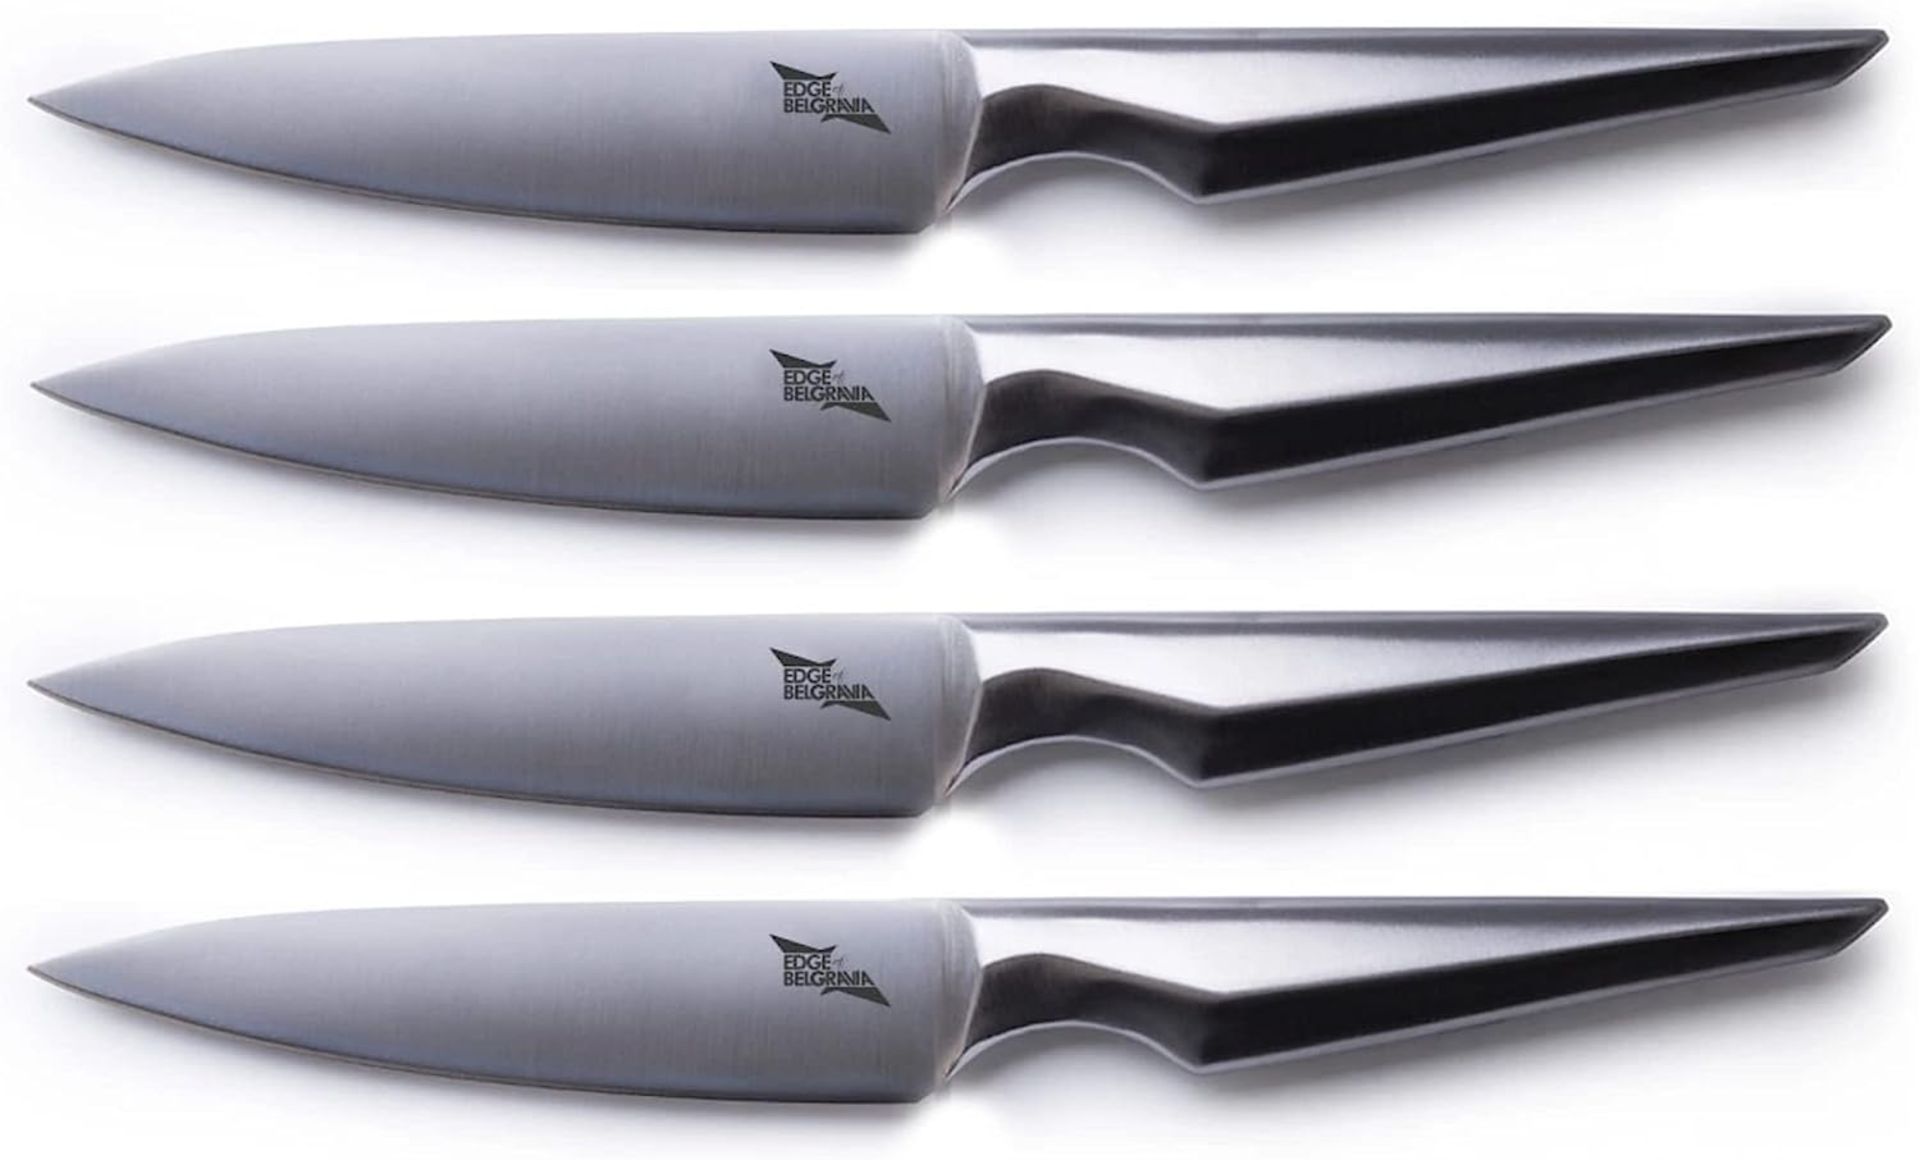 6 X BRAND NEW ARONDIGHT 4 PIECE STEAK KNIFE SETS RRP £79 EACH 002SSA. With the Arondight steak knife